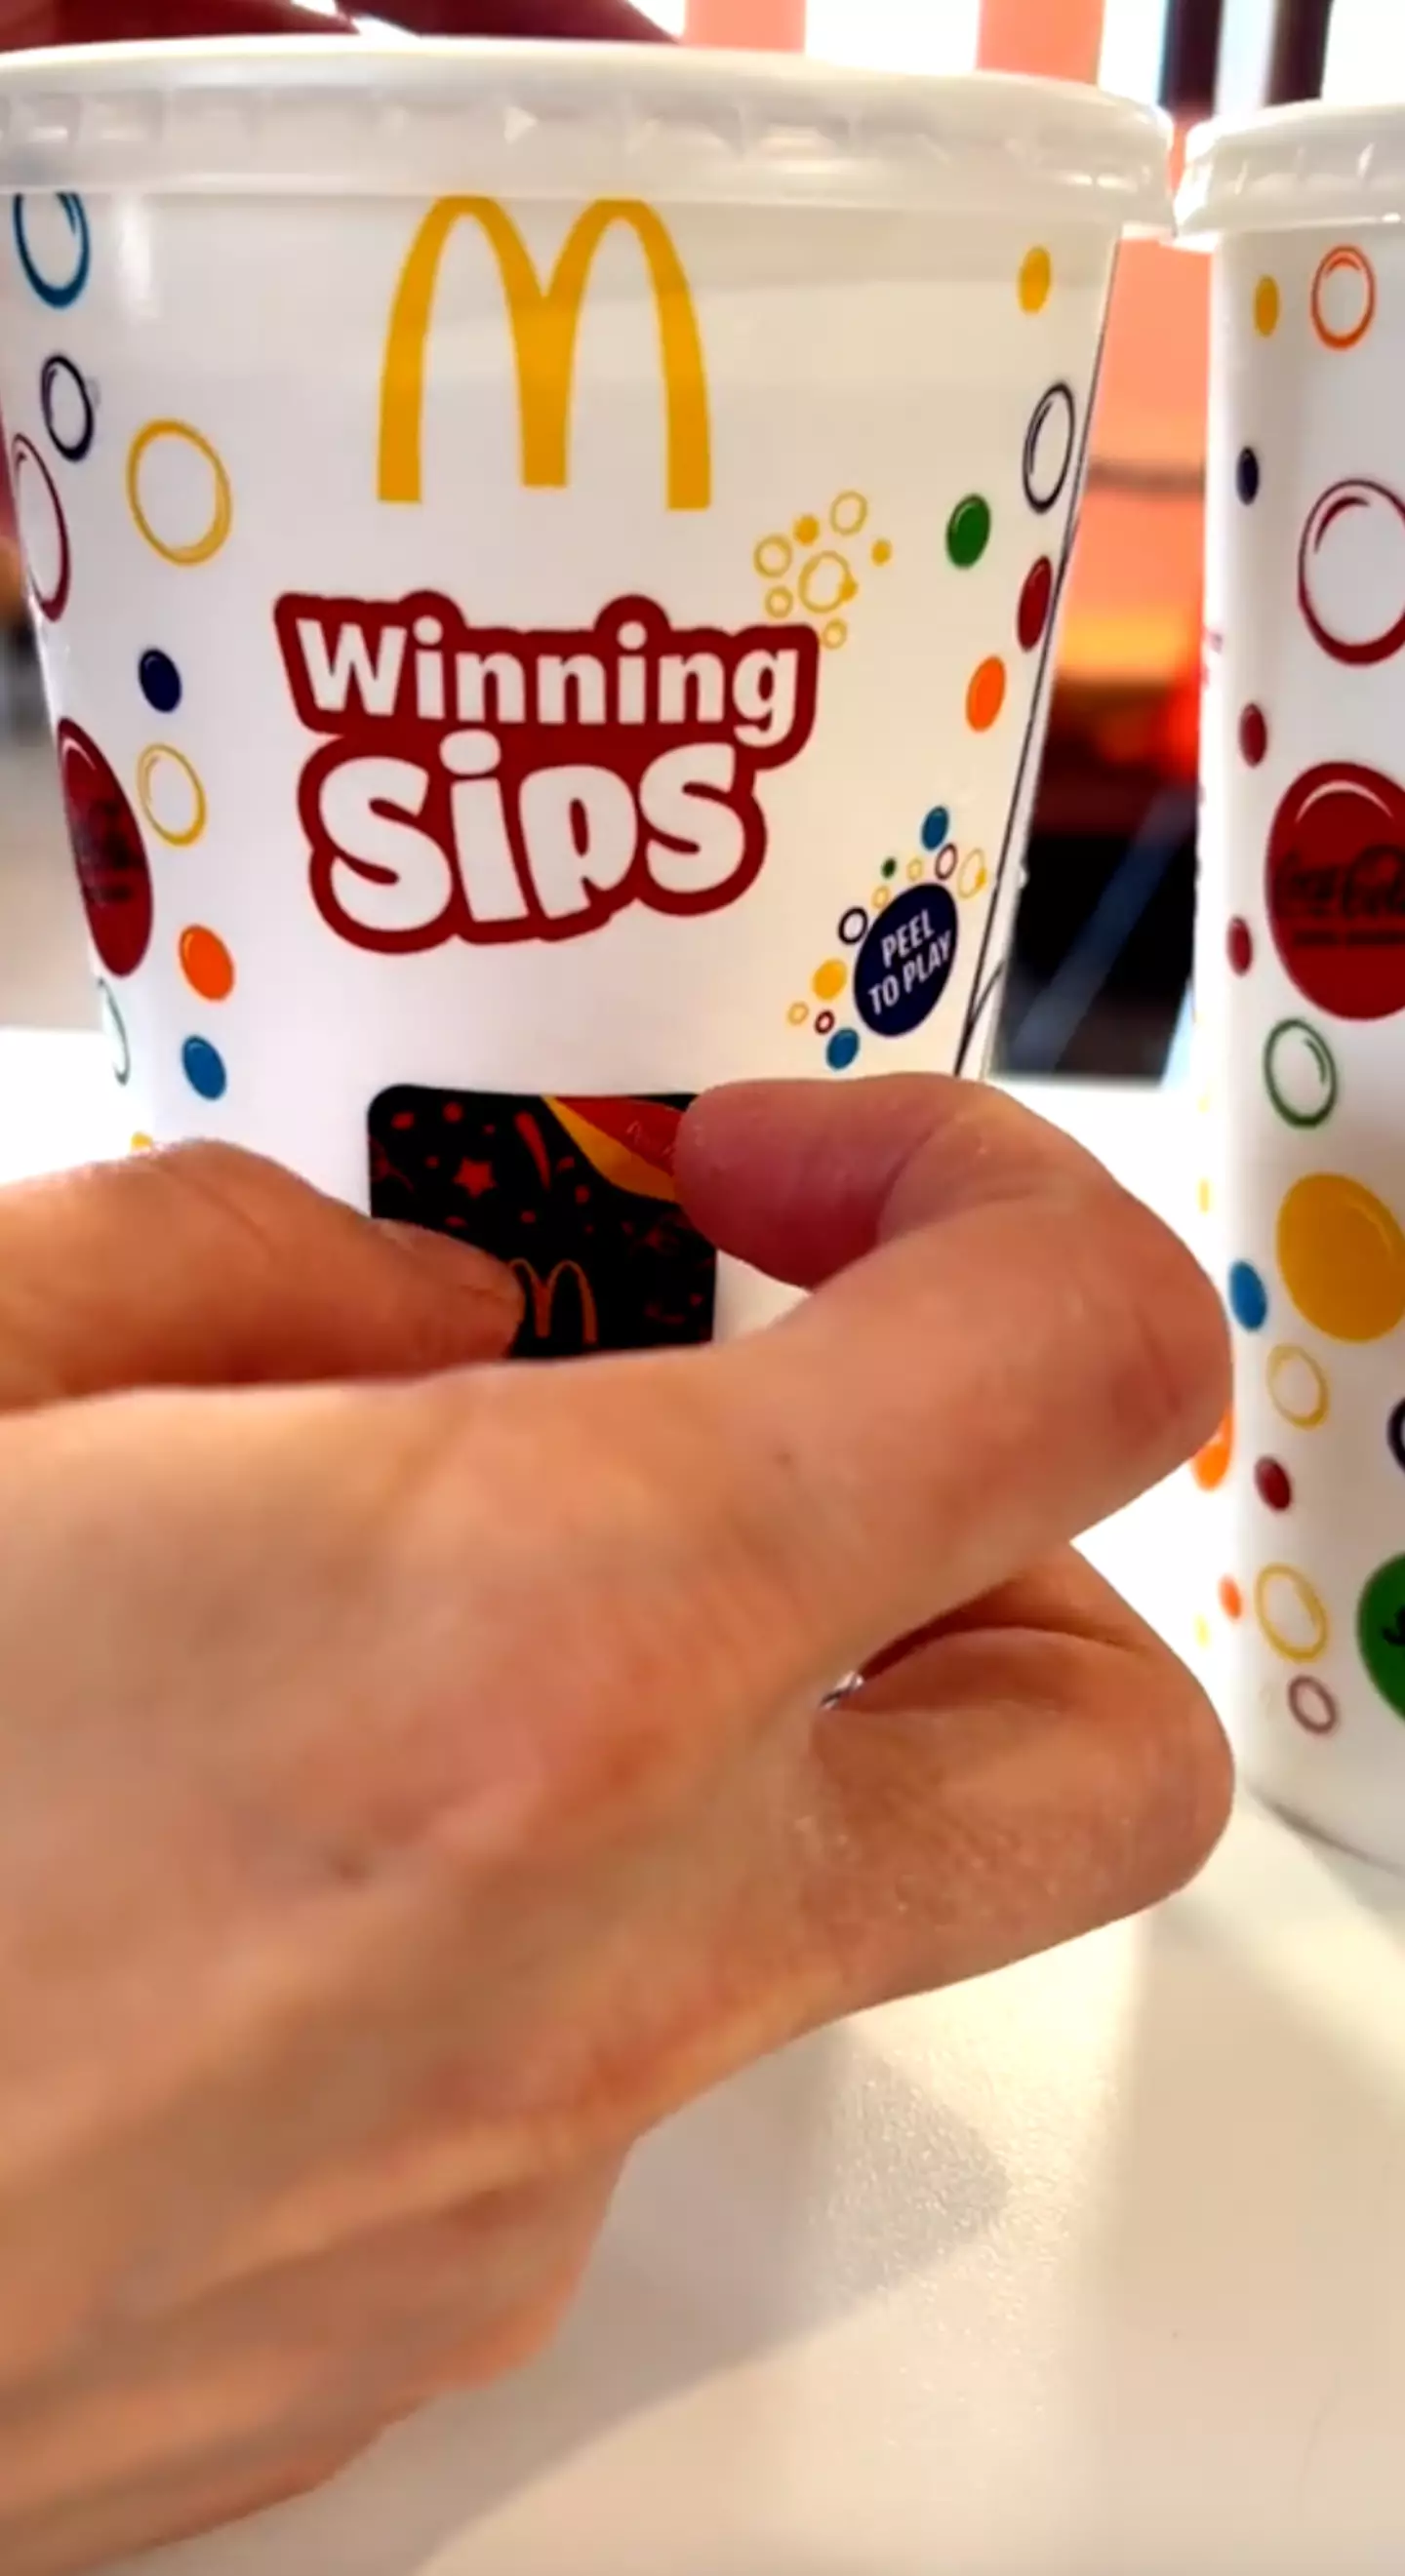 "I won a McFlurry and a chance to win £10k."